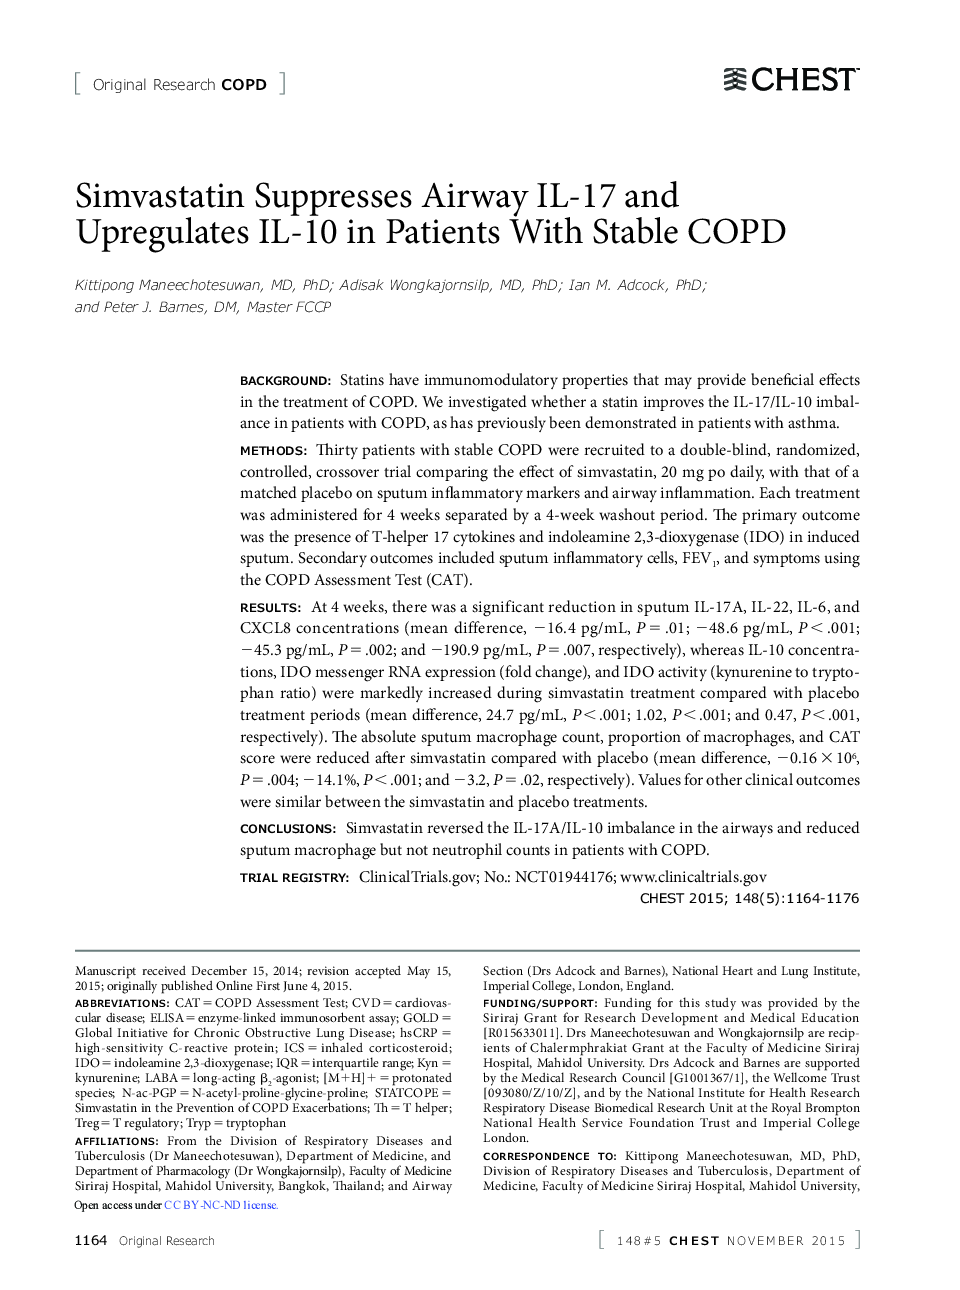 Simvastatin Suppresses Airway IL-17 and Upregulates IL-10 in Patients With Stable COPD